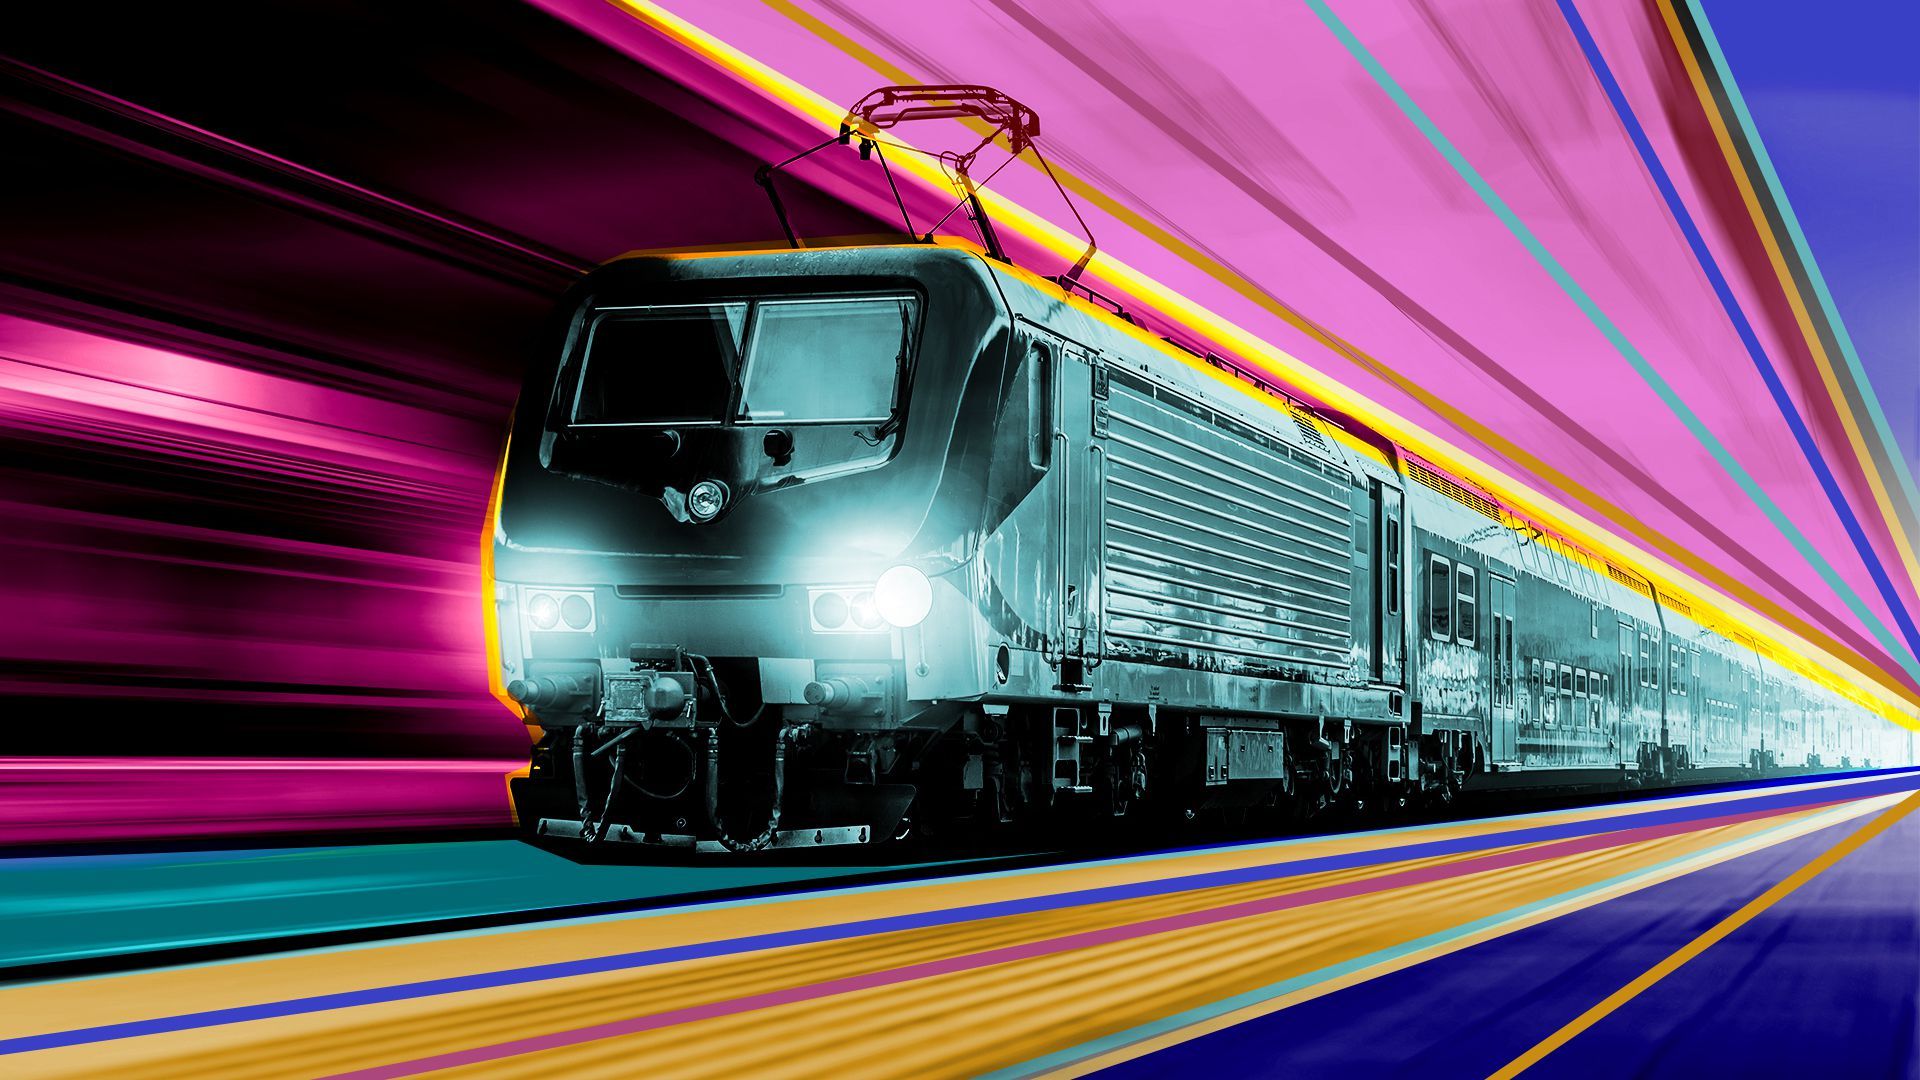 Illustration of a multi-colored train moving fast towards the viewer.